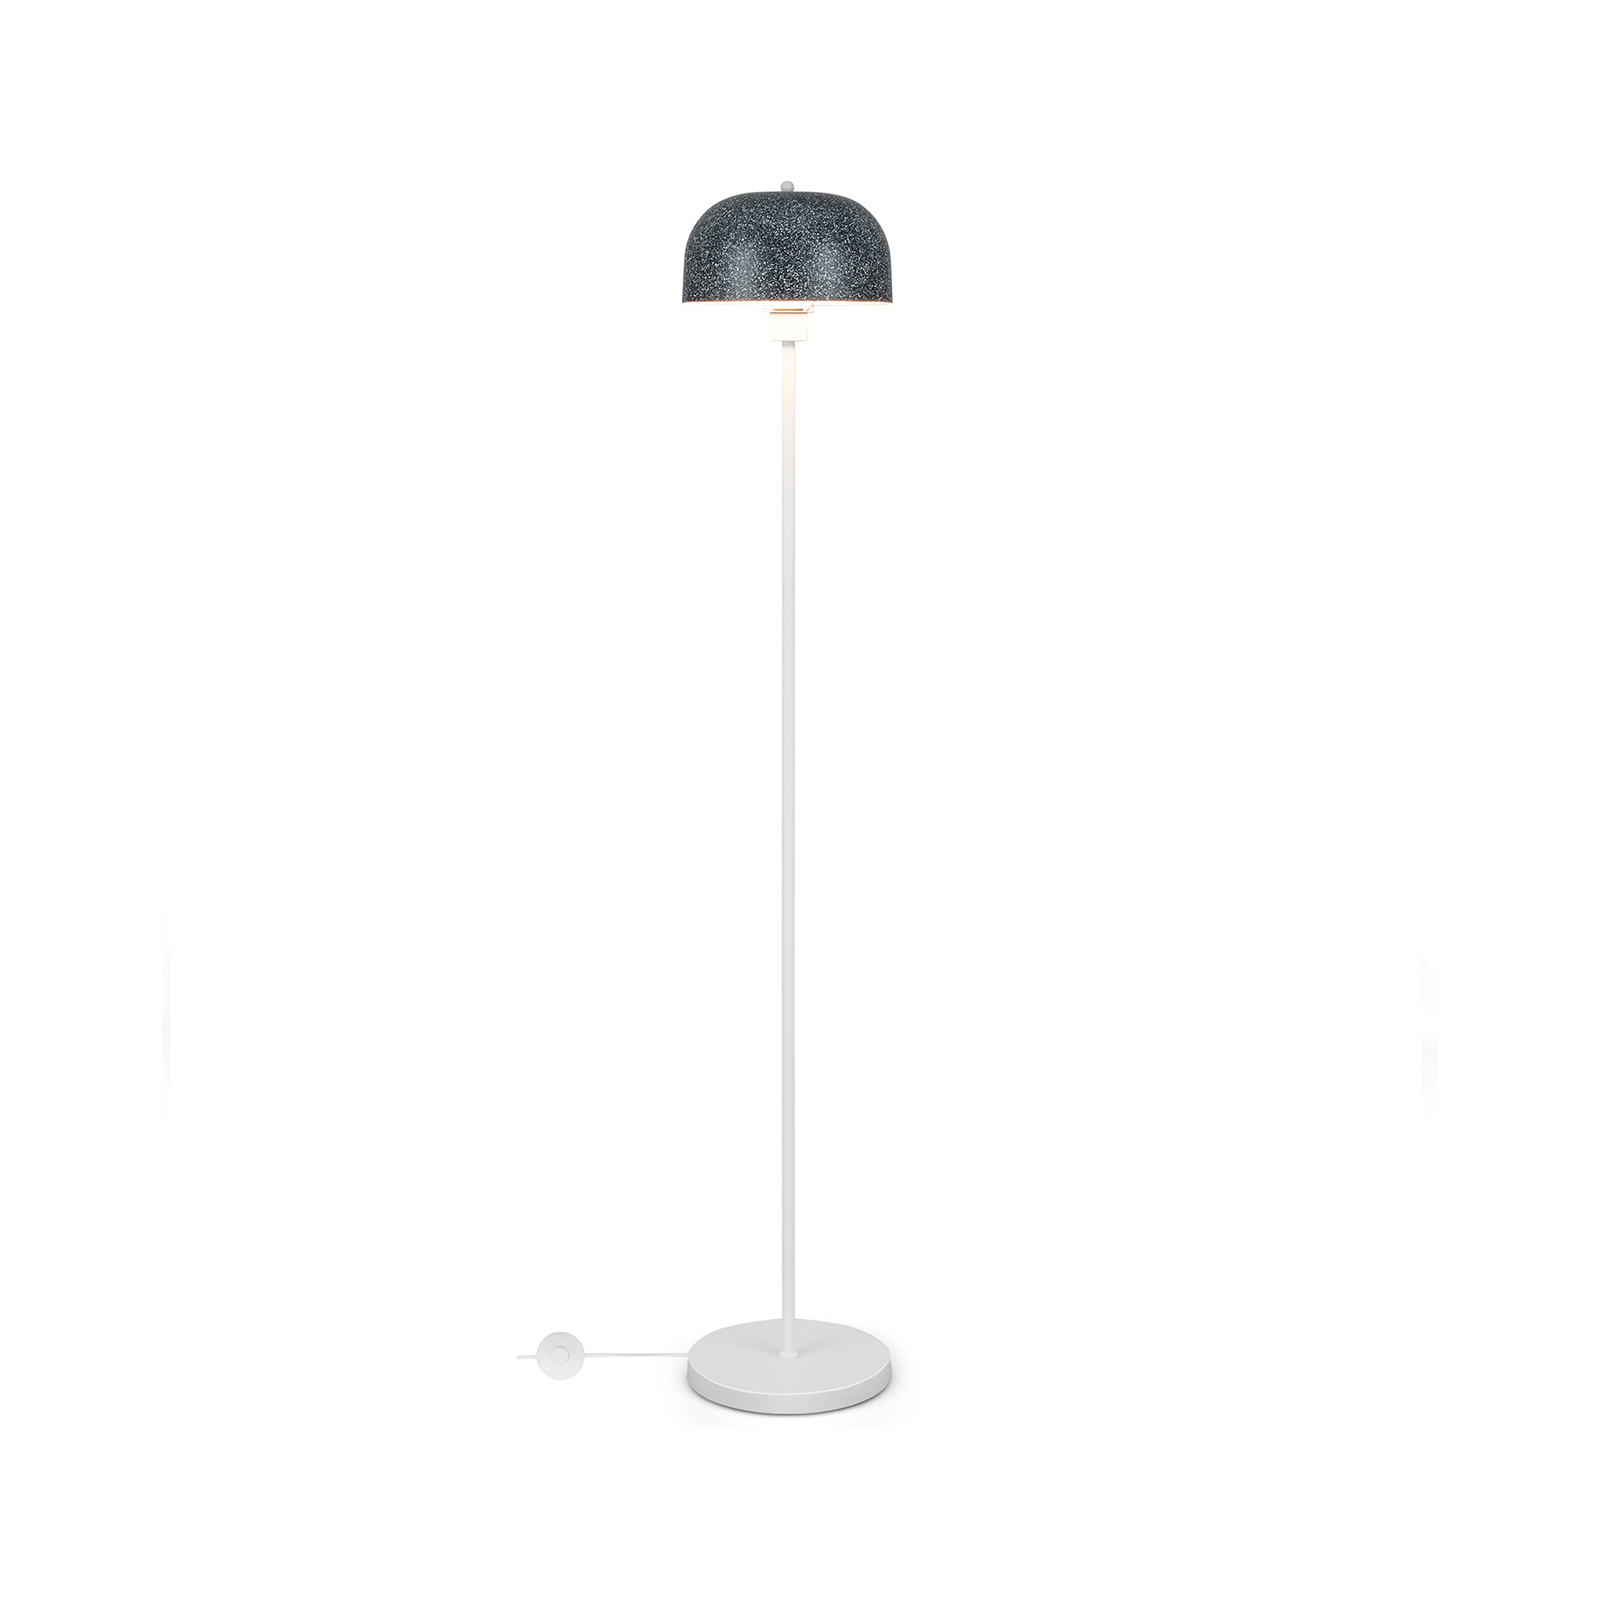 Modern Pole Floor Lamp with Lampshade and Foot Switch